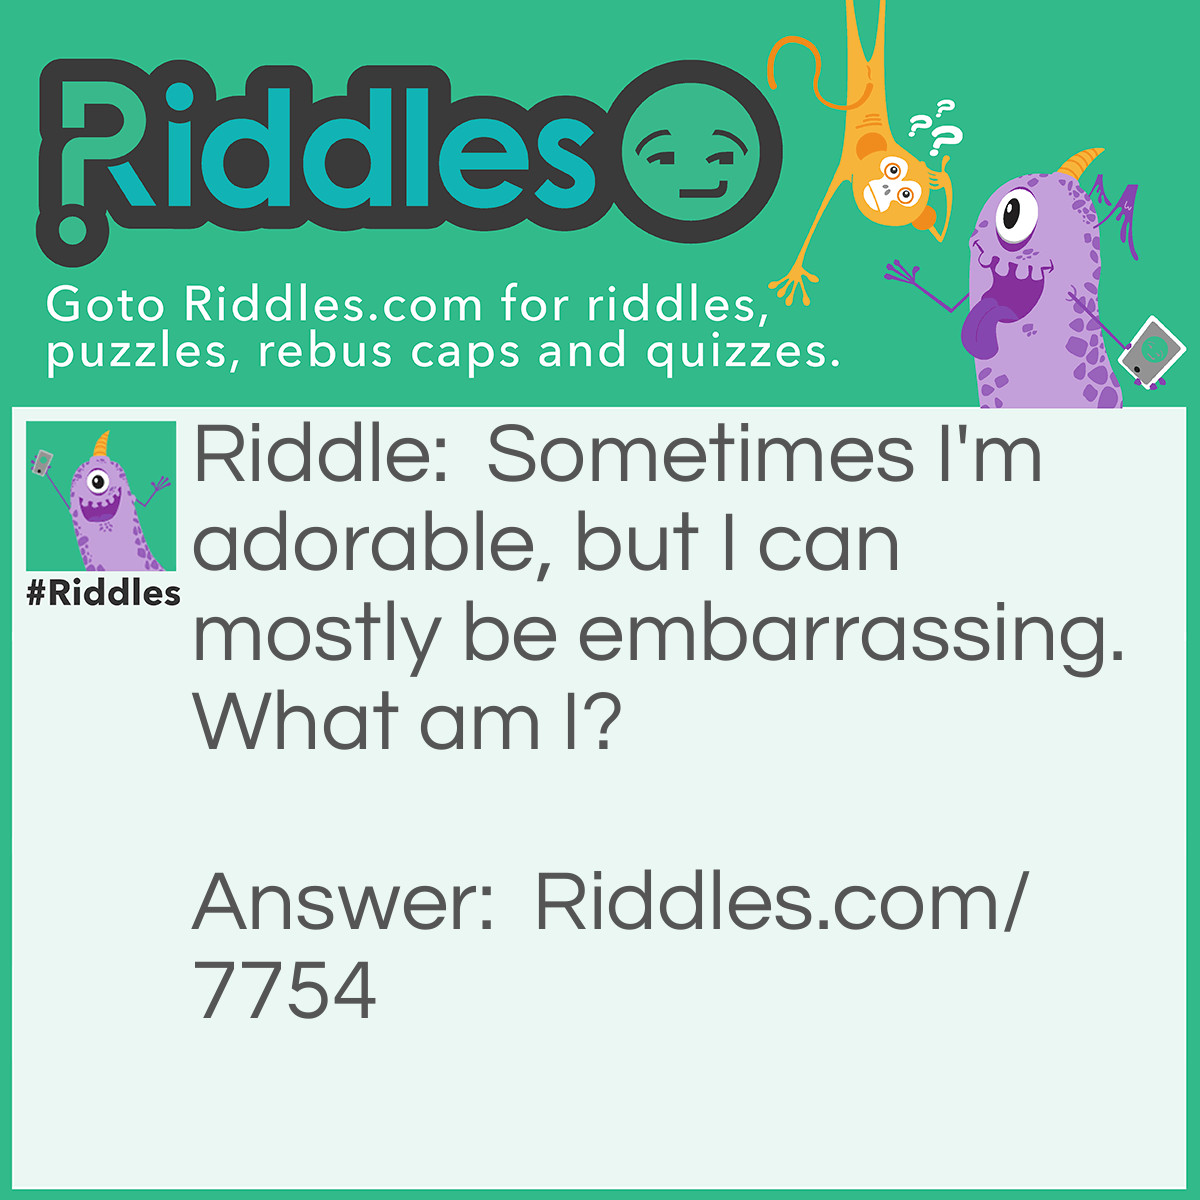 Riddle: Sometimes I'm adorable, but I can mostly be embarrassing. What am I? Answer: Your baby pictures.